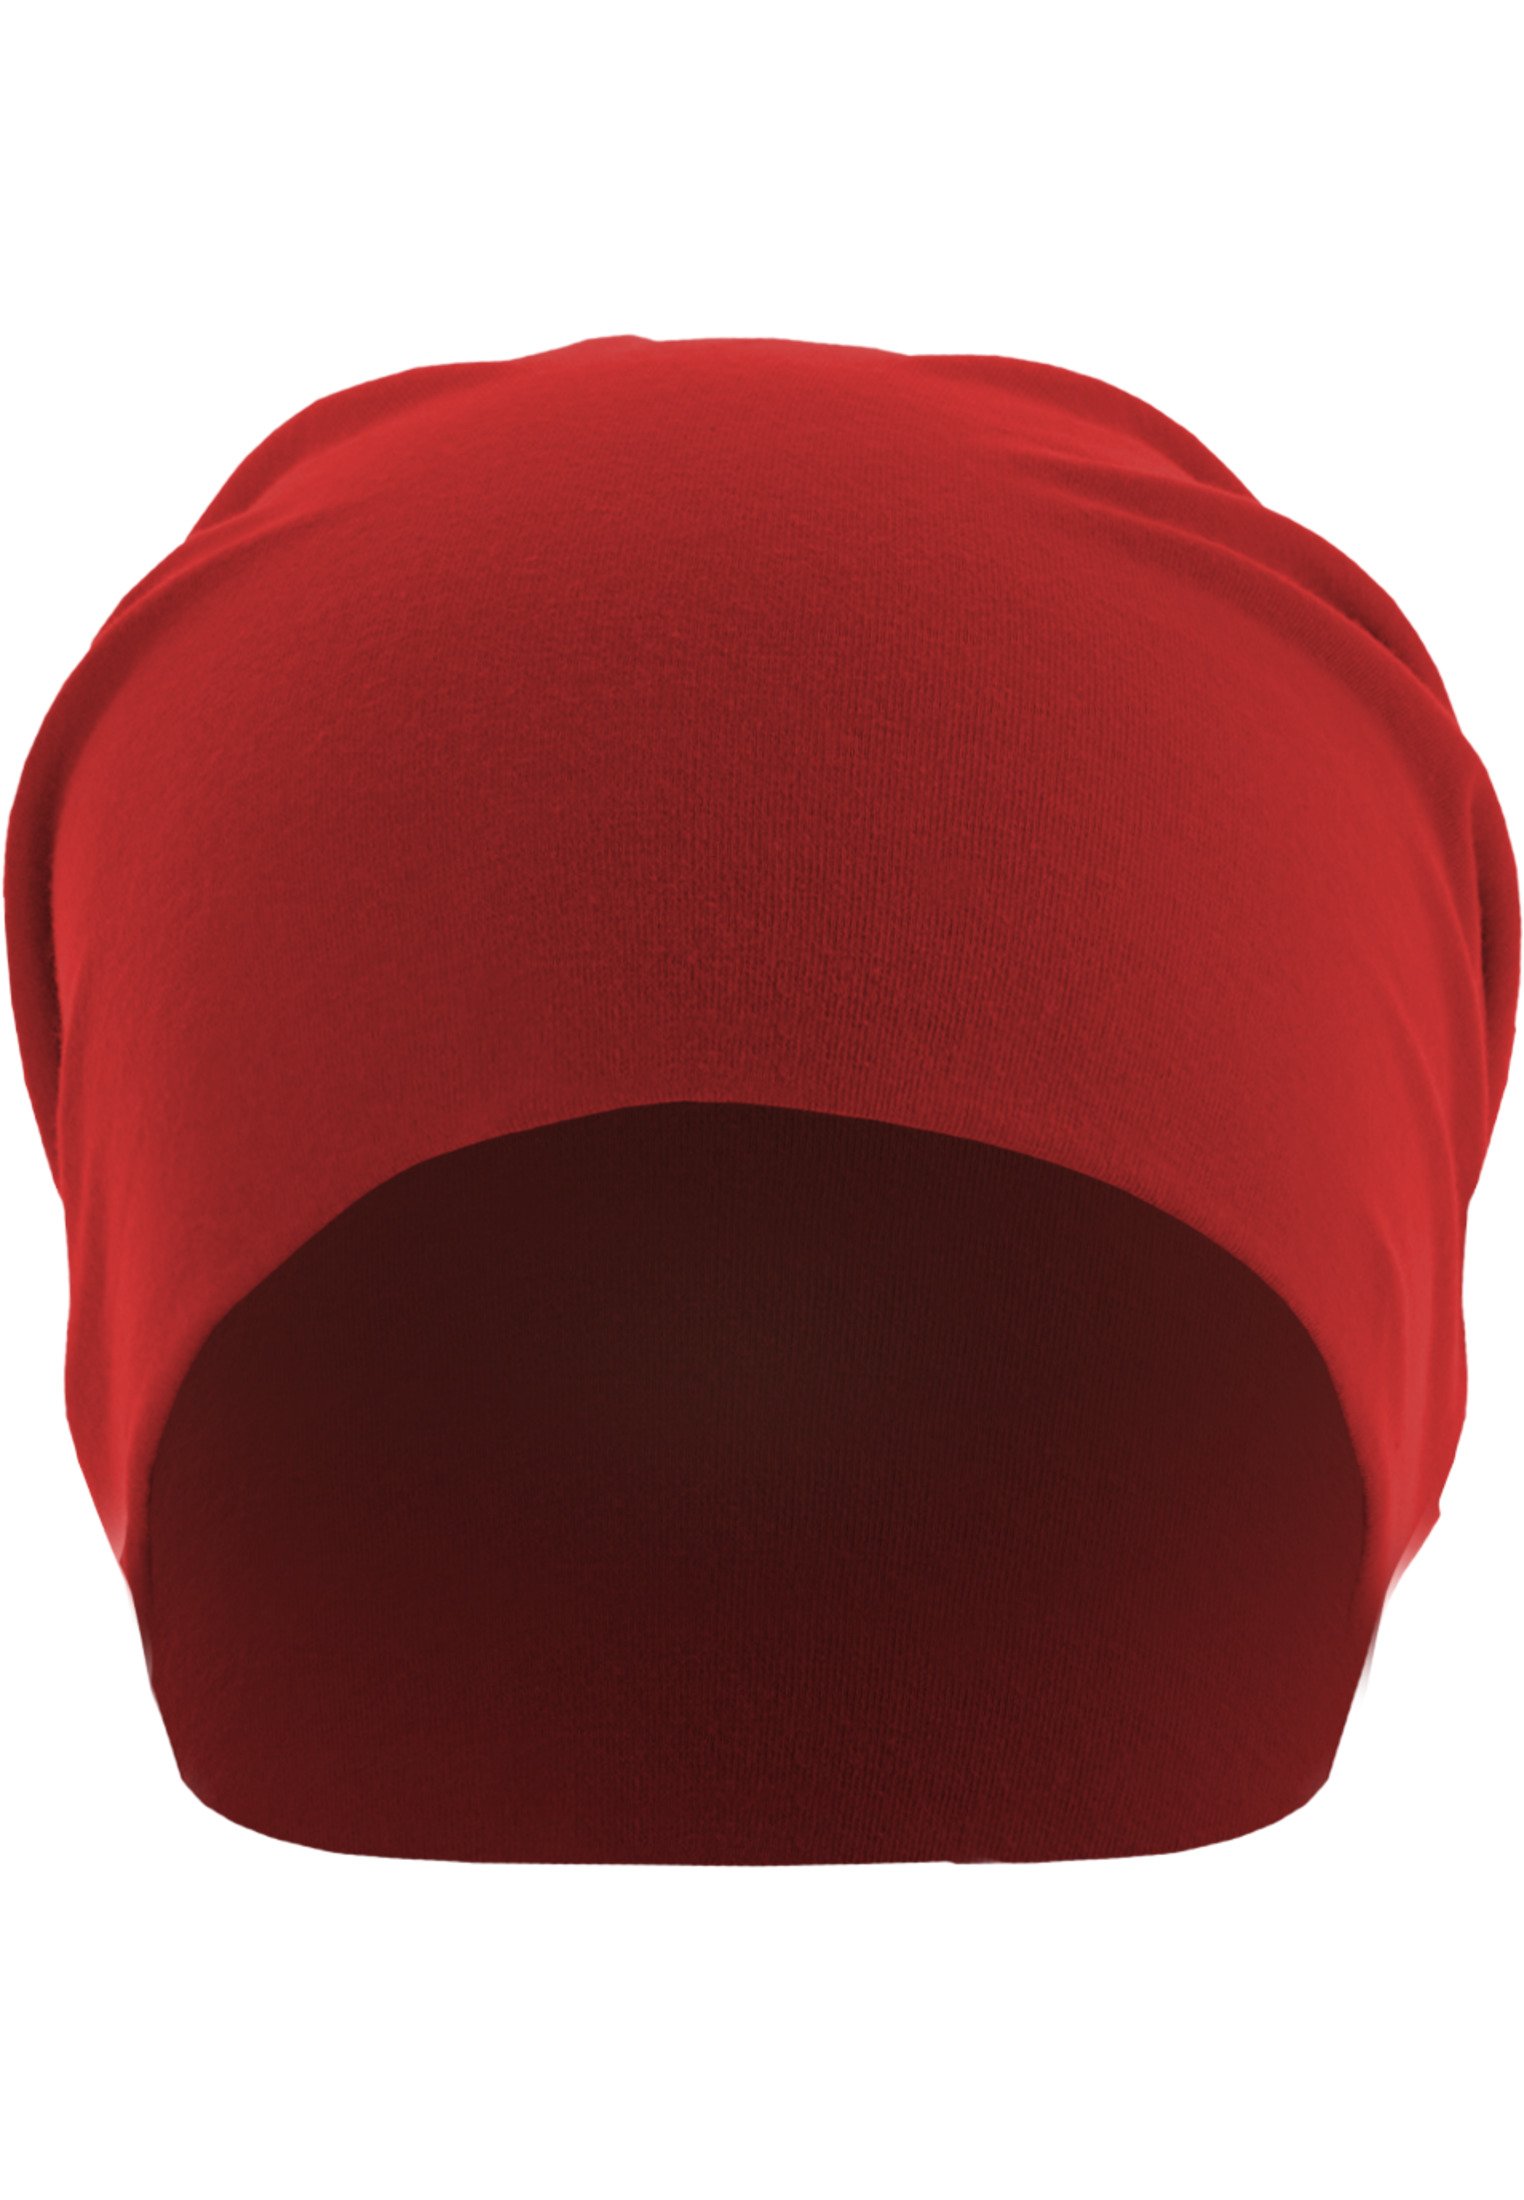 Jersey Beanie MSTRDS red one size